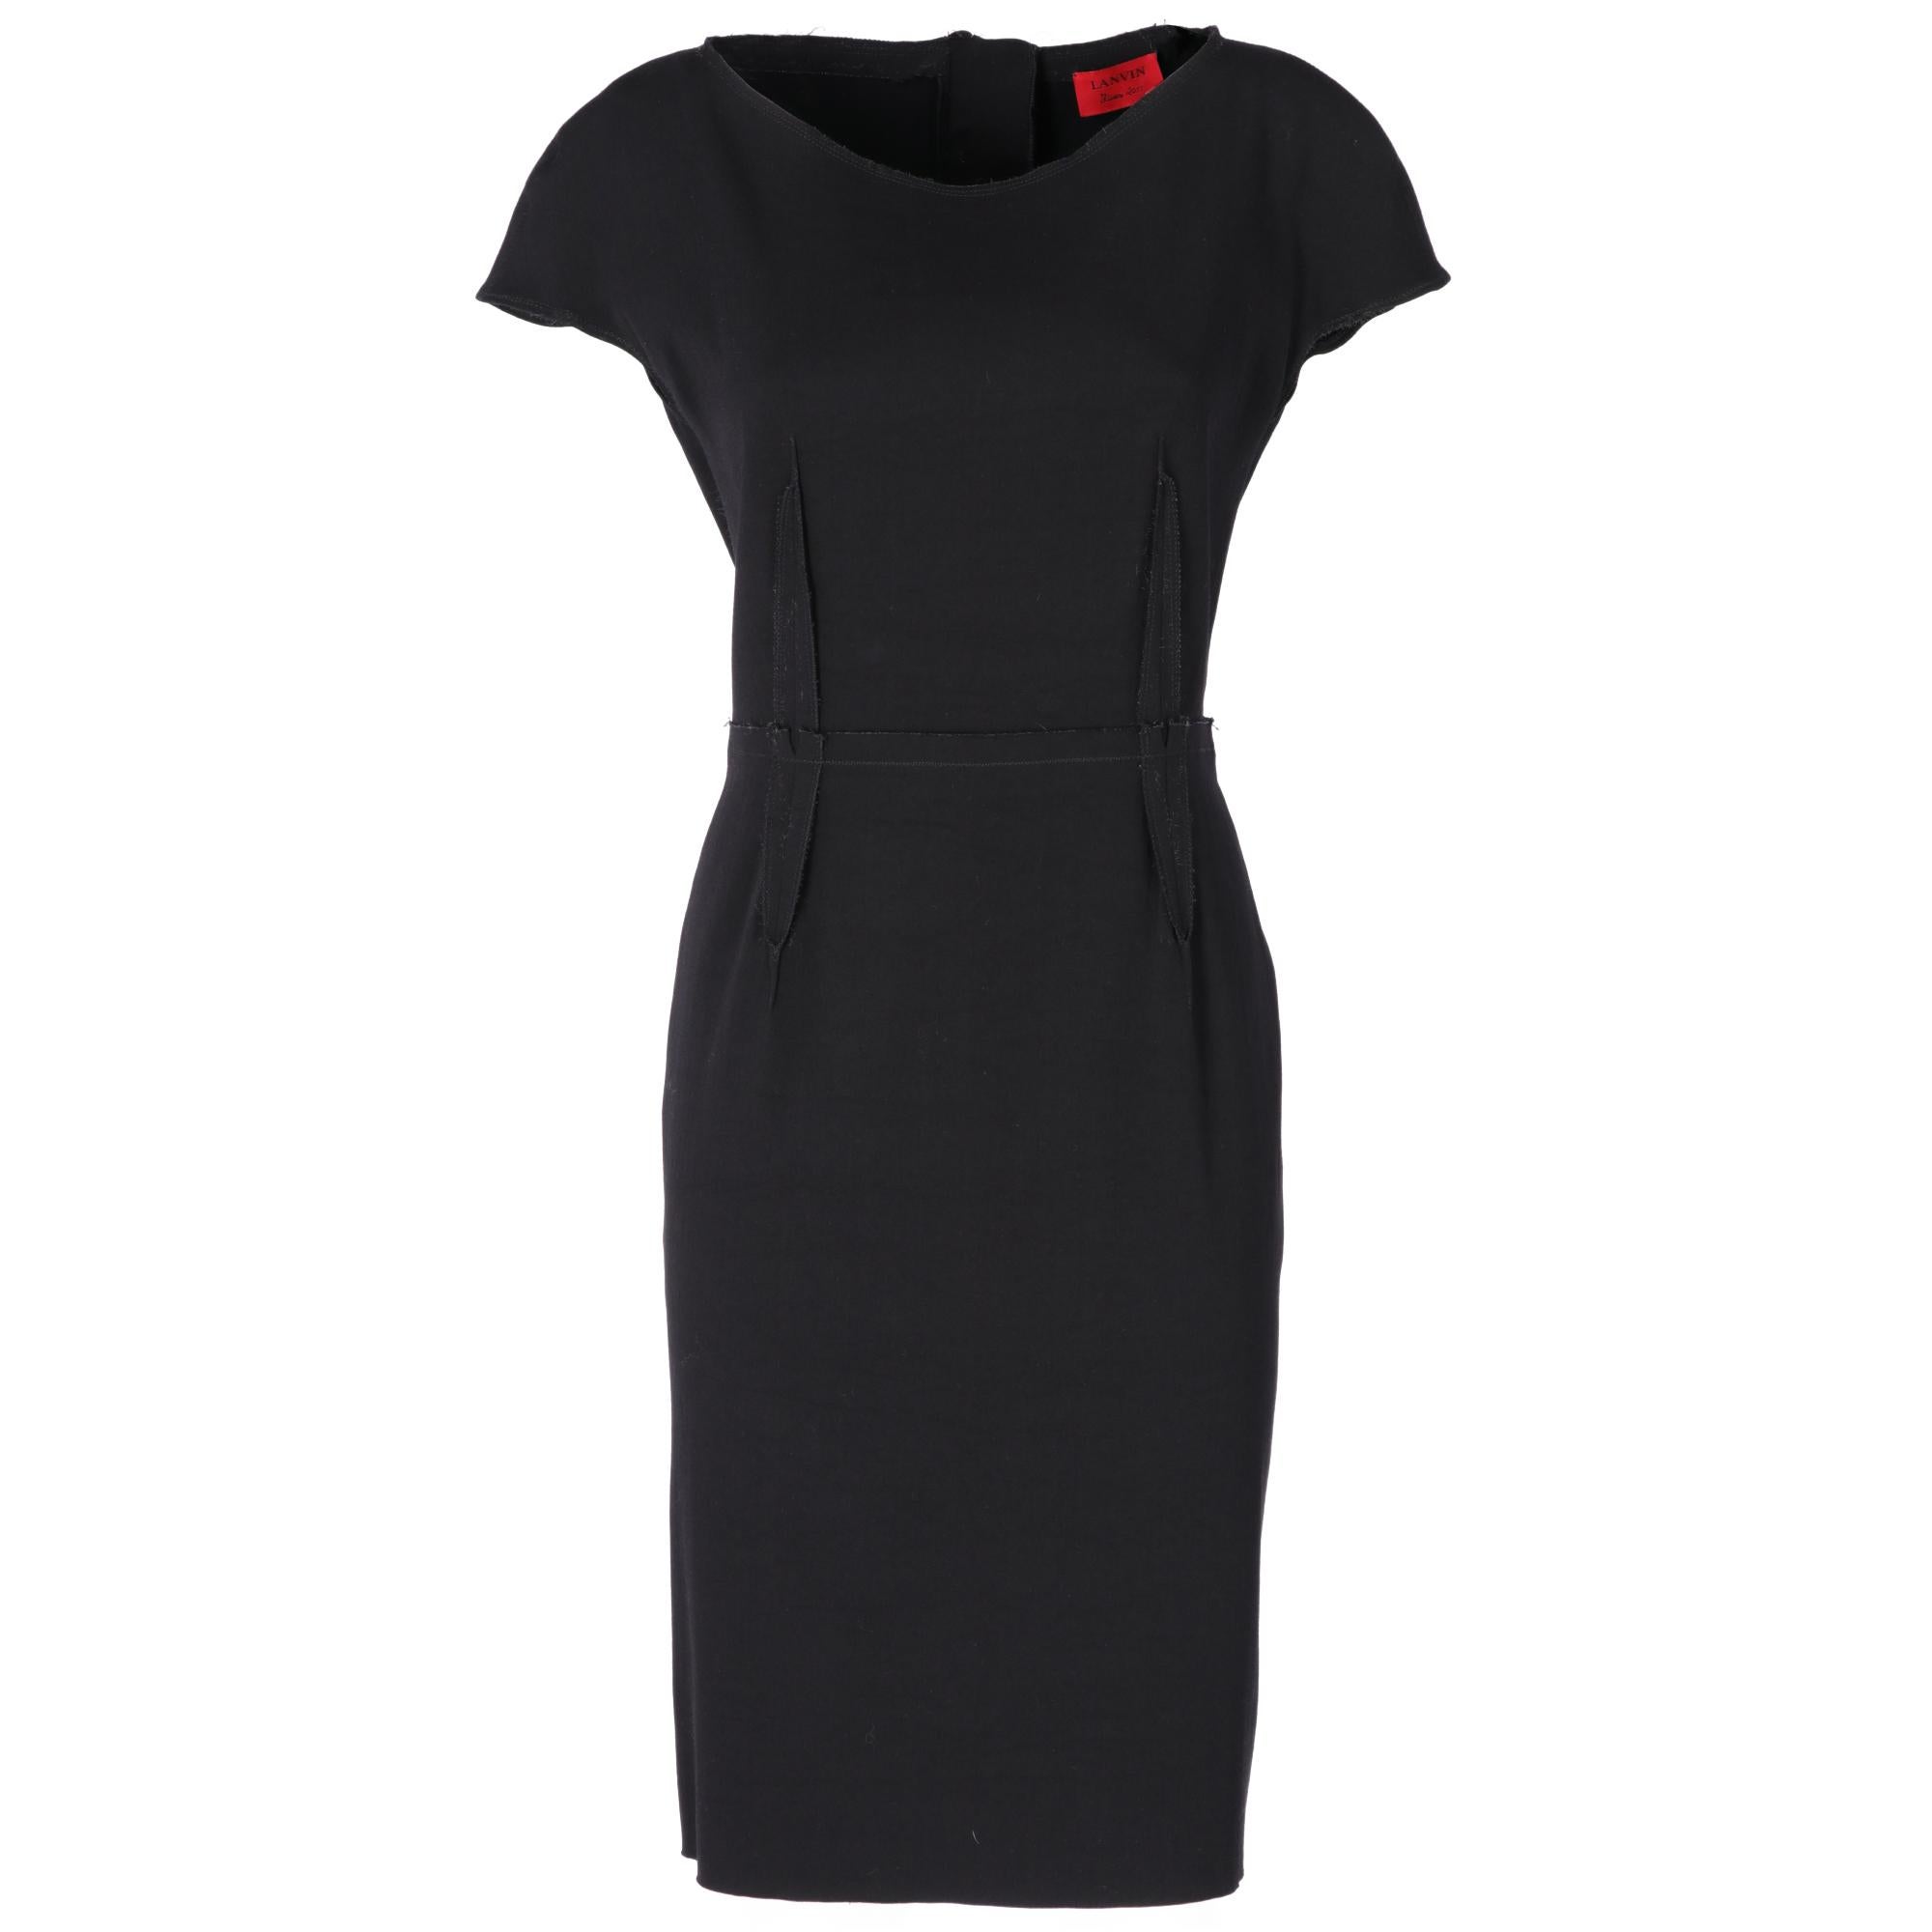 Flared Lanvin black midi dress, round neck, hidden zip on the back, short sleeves, raw cut edges and slit on the back.

Years: Winter 2011

Made in France

Size: M

Linear measures

Height: 98 cm
Bust: 41 cm 
Waist: 37 cm
Shoulders: 44 cm 

